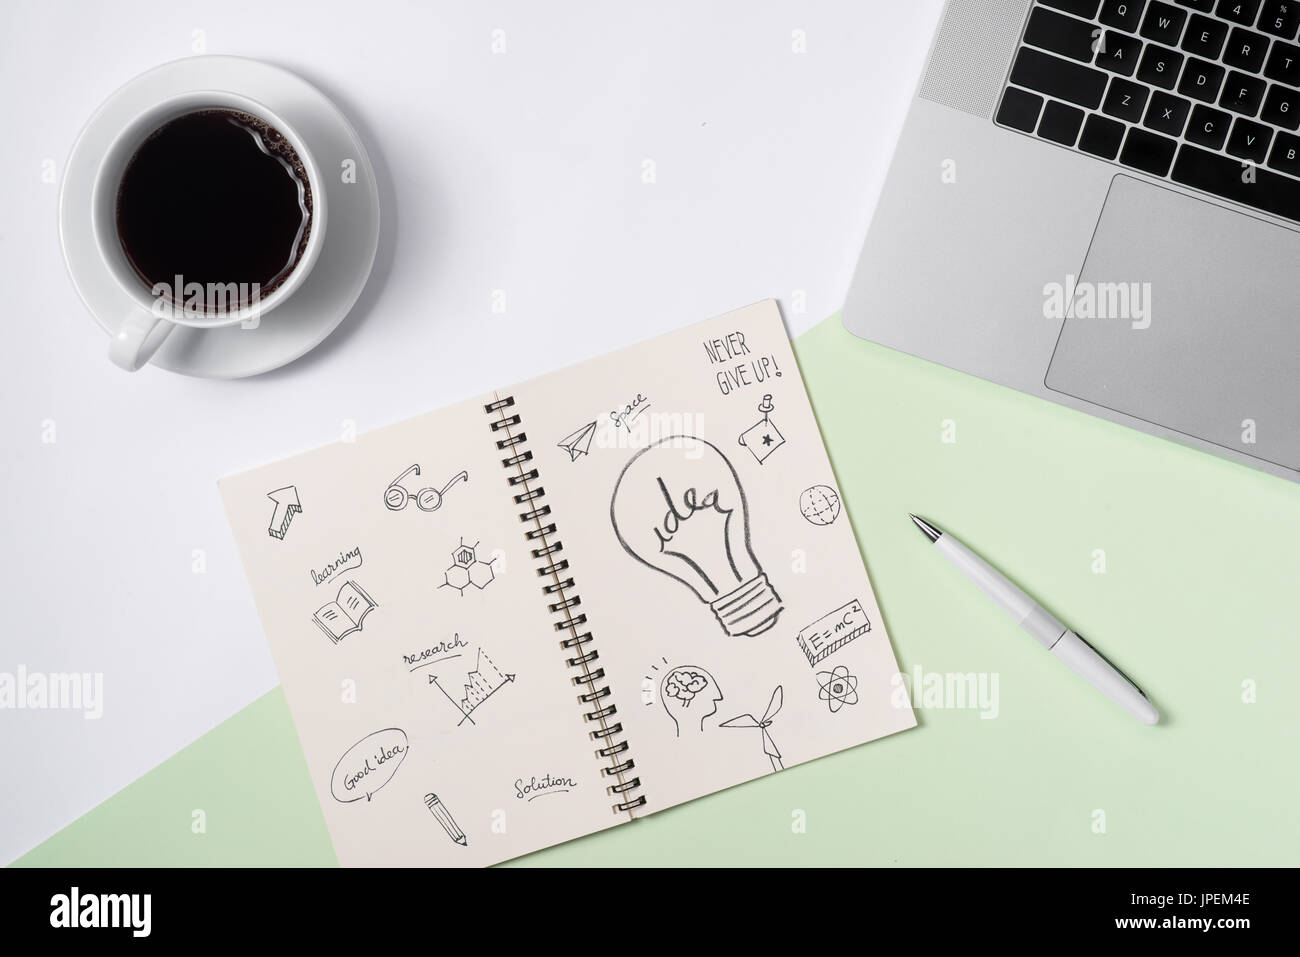 Business ideas, creativity, inspiration and start up concepts, ideas message on notebook with lightbulb. Stock Photo